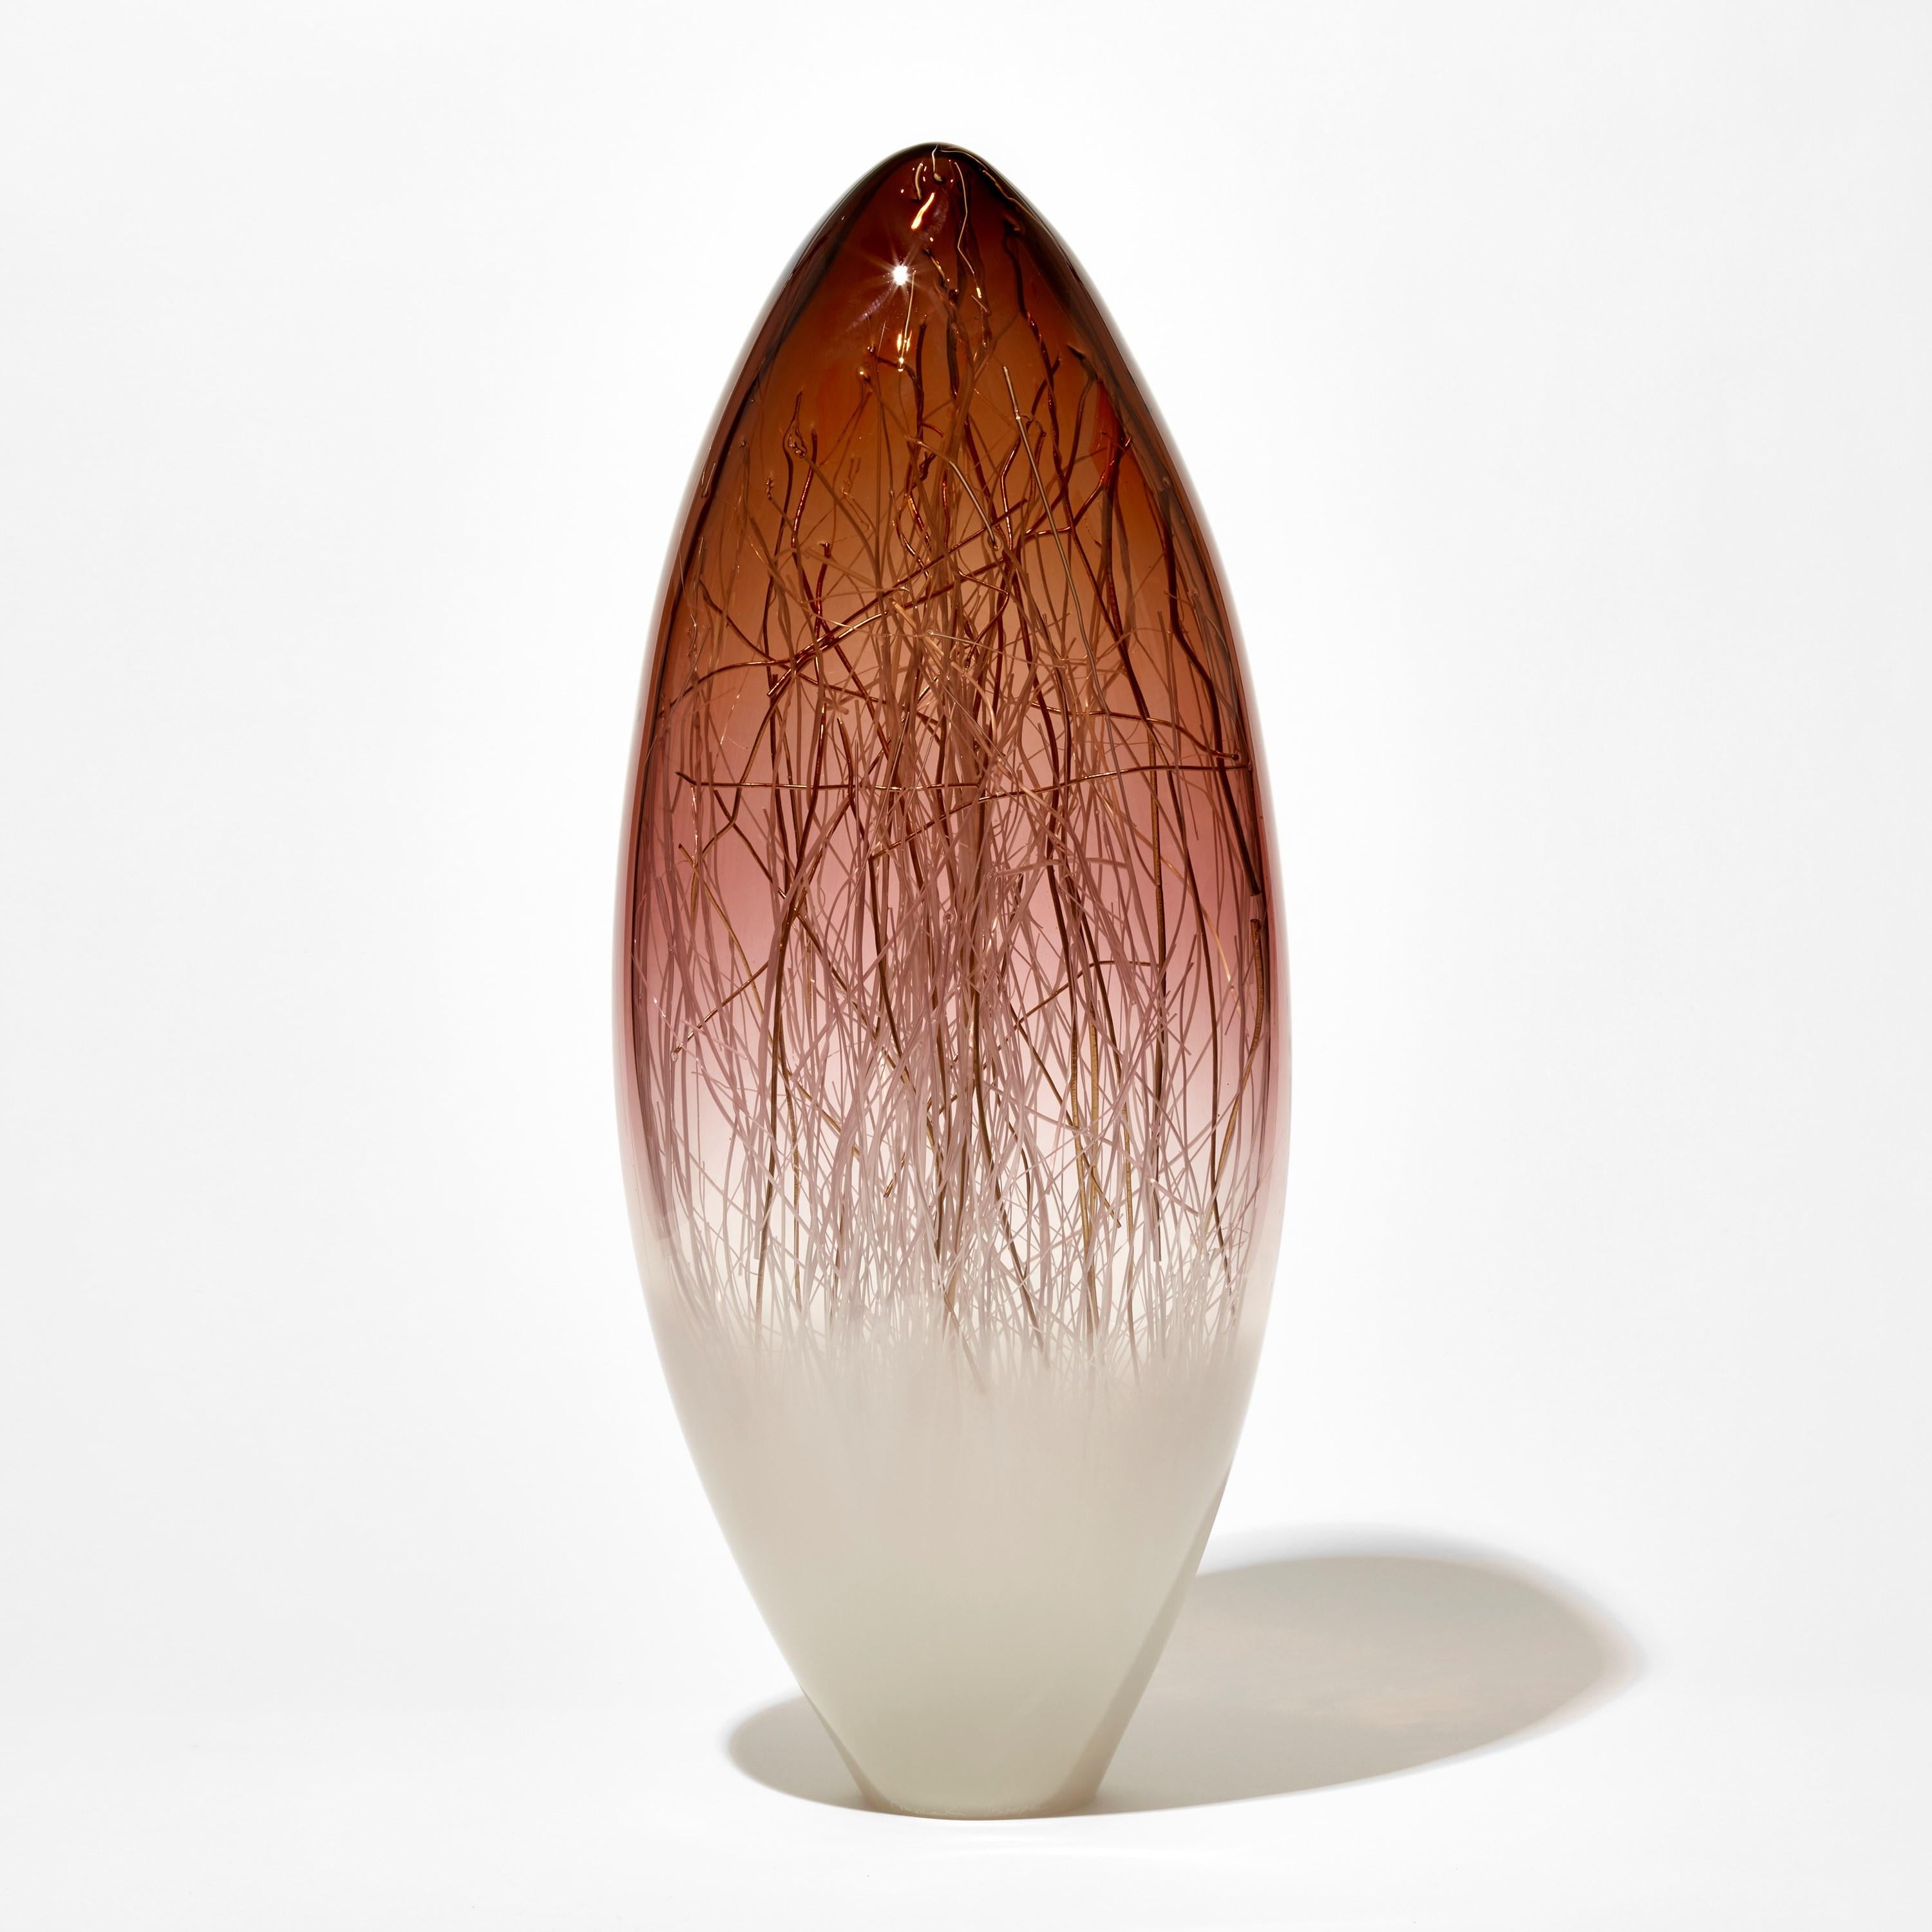 'Ore in Sienna & Ecru with gold' is a unique glass sculpture in aubergine and off-white colored glass by the collaborative artists Hanne Enemark (Danish) and Louis Thompson (British). The outer glass form contains a multitude of fine white canes of